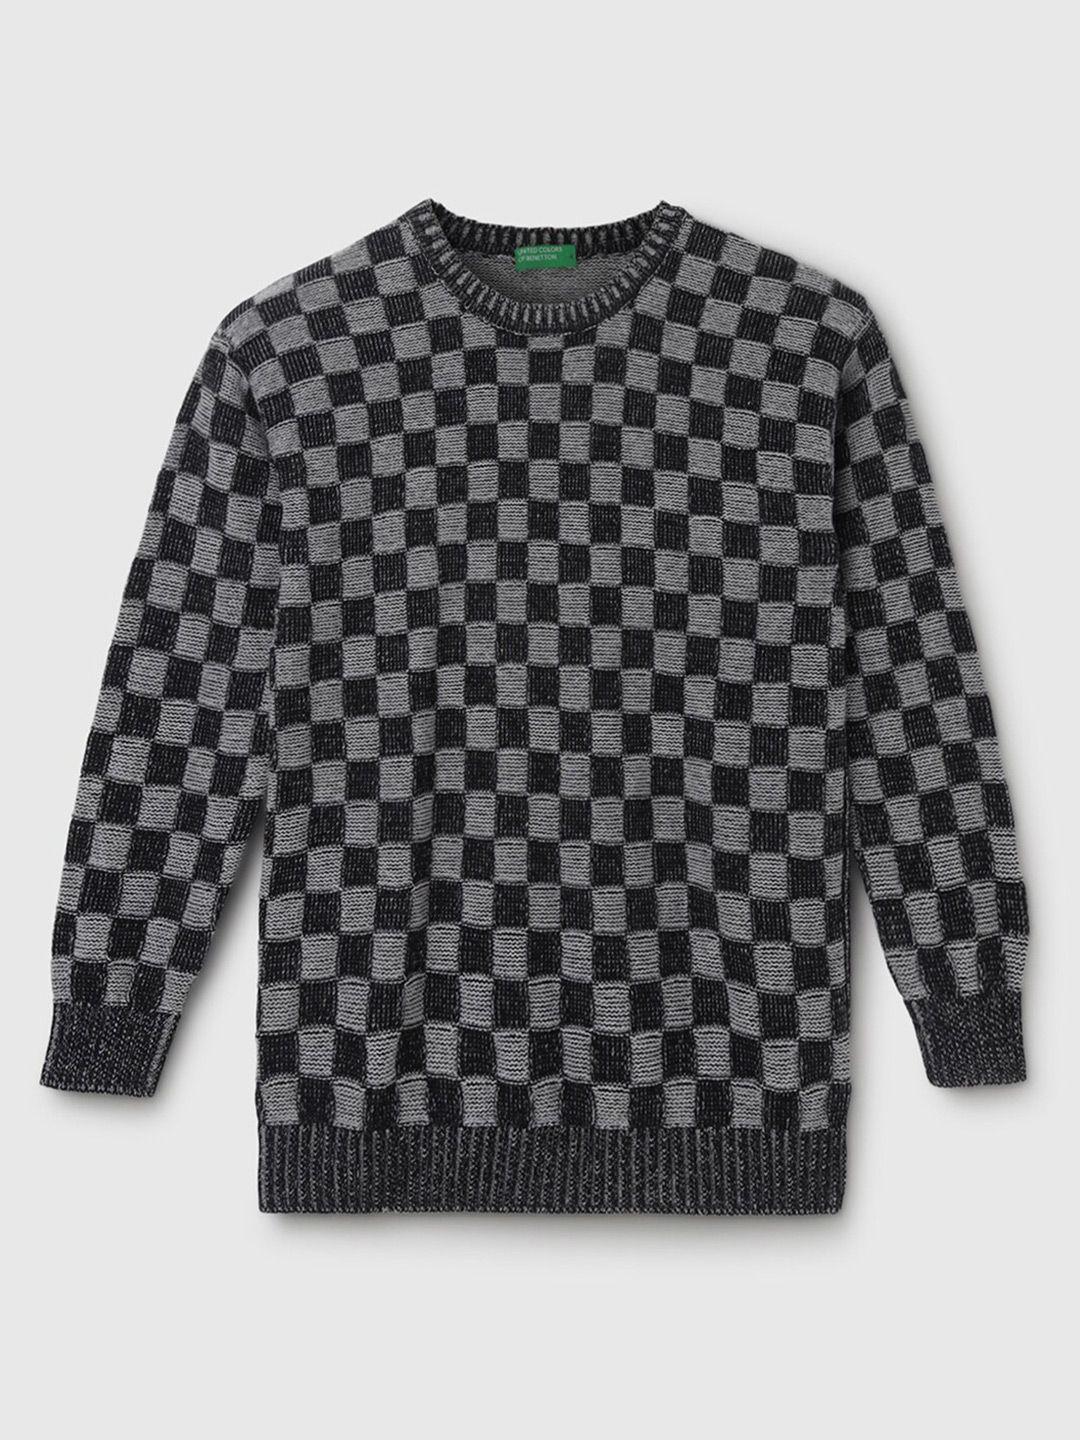 United Colors of Benetton Boys Checked Cotton Pullover